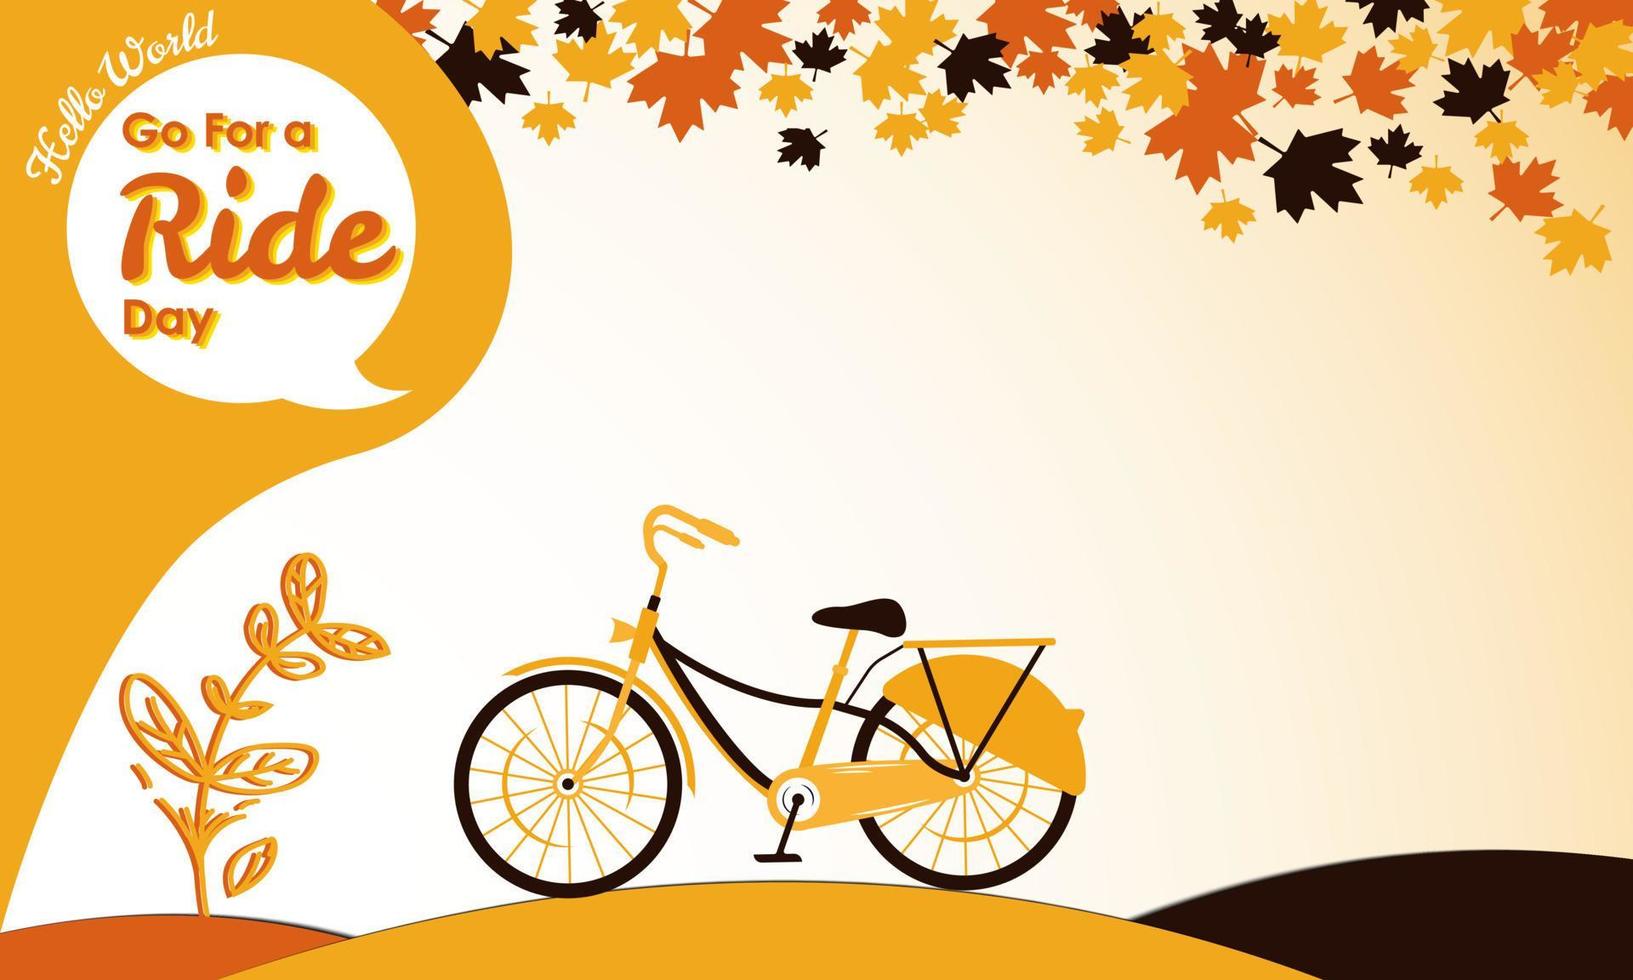 Go for a Ride Day Background. November 21. Premium and luxury greeting card, letter, poster, or banner. With bike, bicycle and cloud icon vector illustration